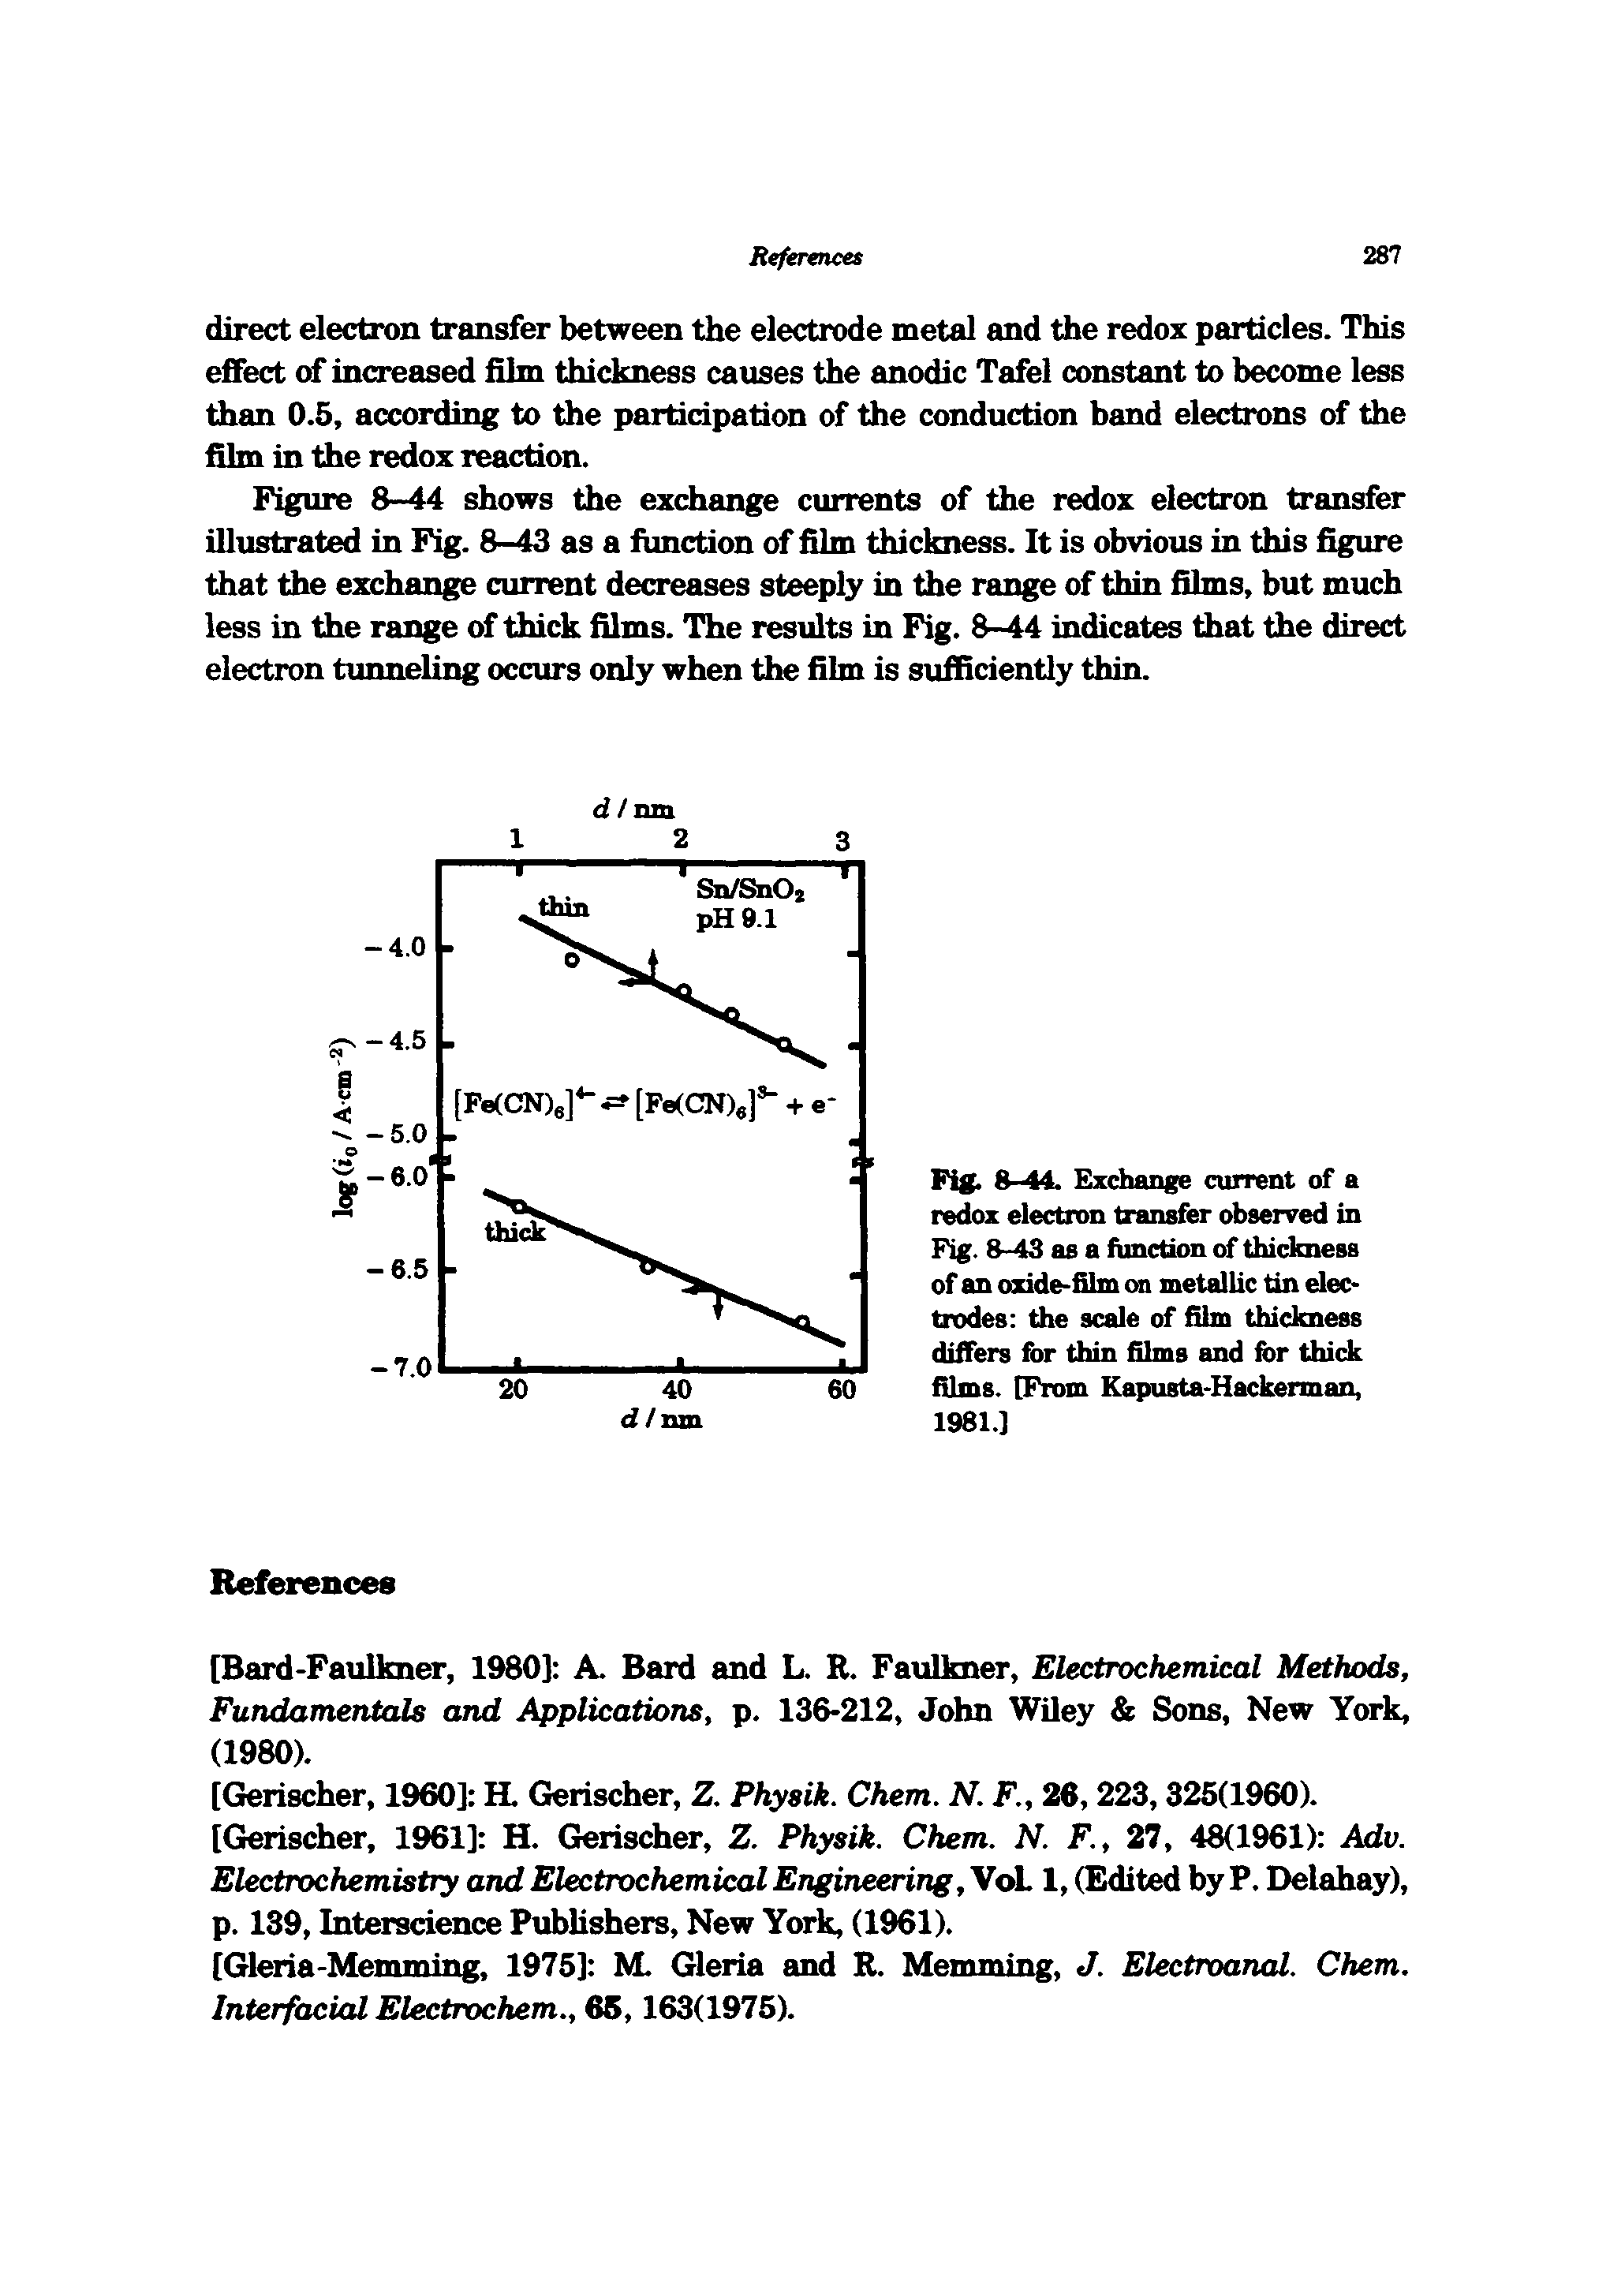 Fig. 8-44. Exchange current of a redox electron transfer observed in Fig. 8-43 as a function of thidmess of an oxide-film on metallic tin electrodes the scale of film thickness differs for thin films and for thick films. [From Kapusta-Hackerman, 1981.1...